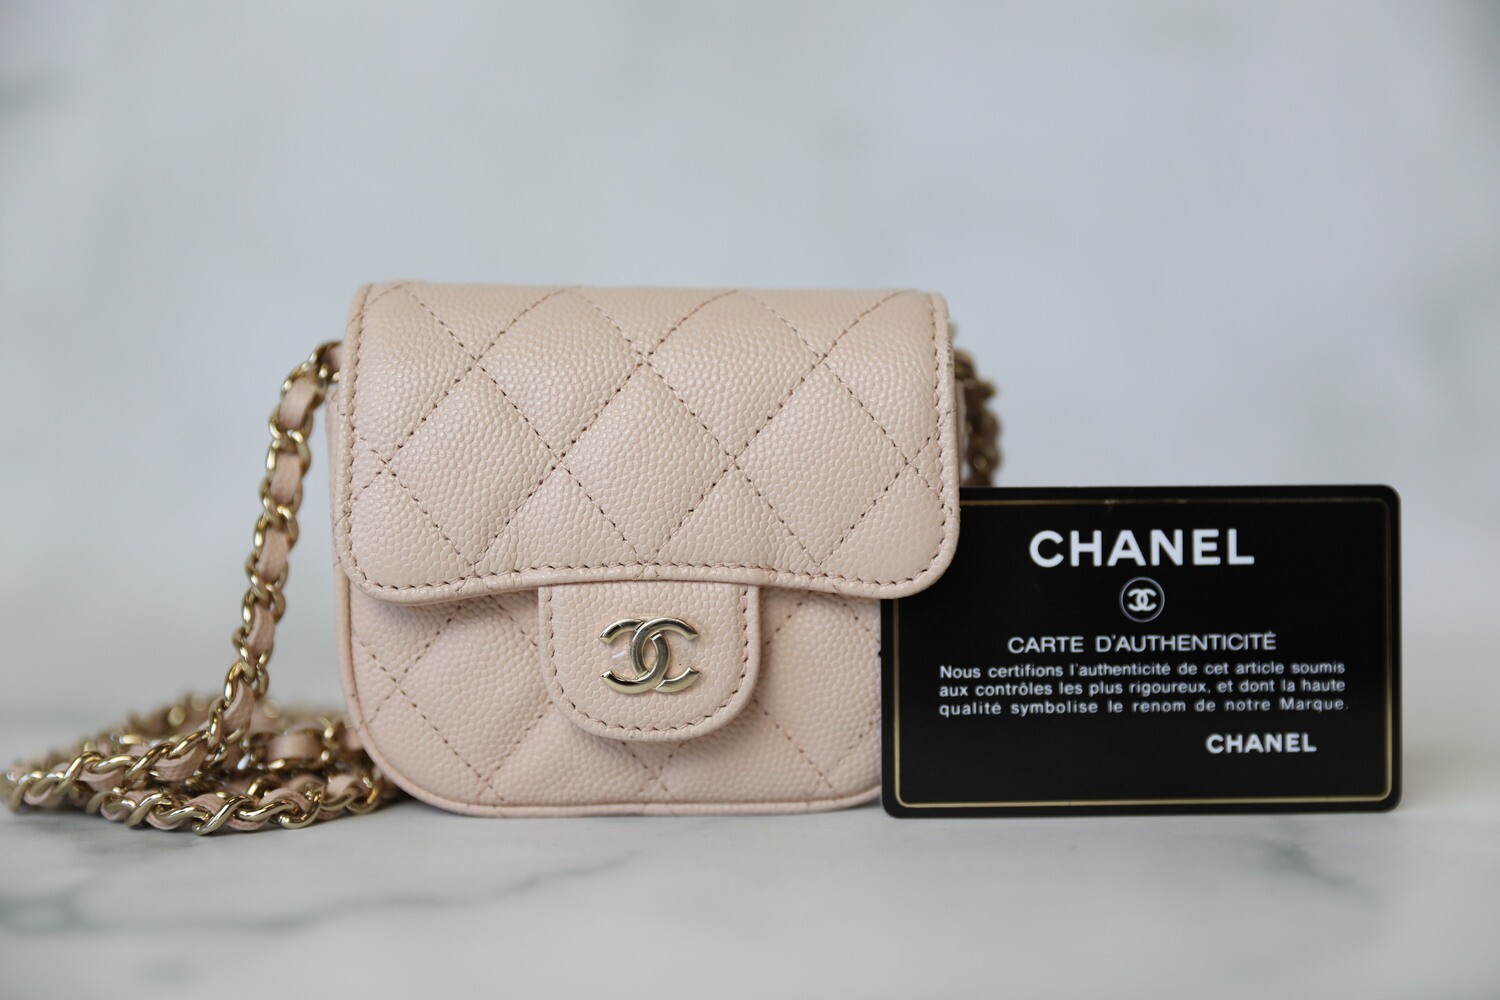 Chanel Wallet on Chain with Top Handle, Black Caviar with Gold Hardware,  New in Box WA001